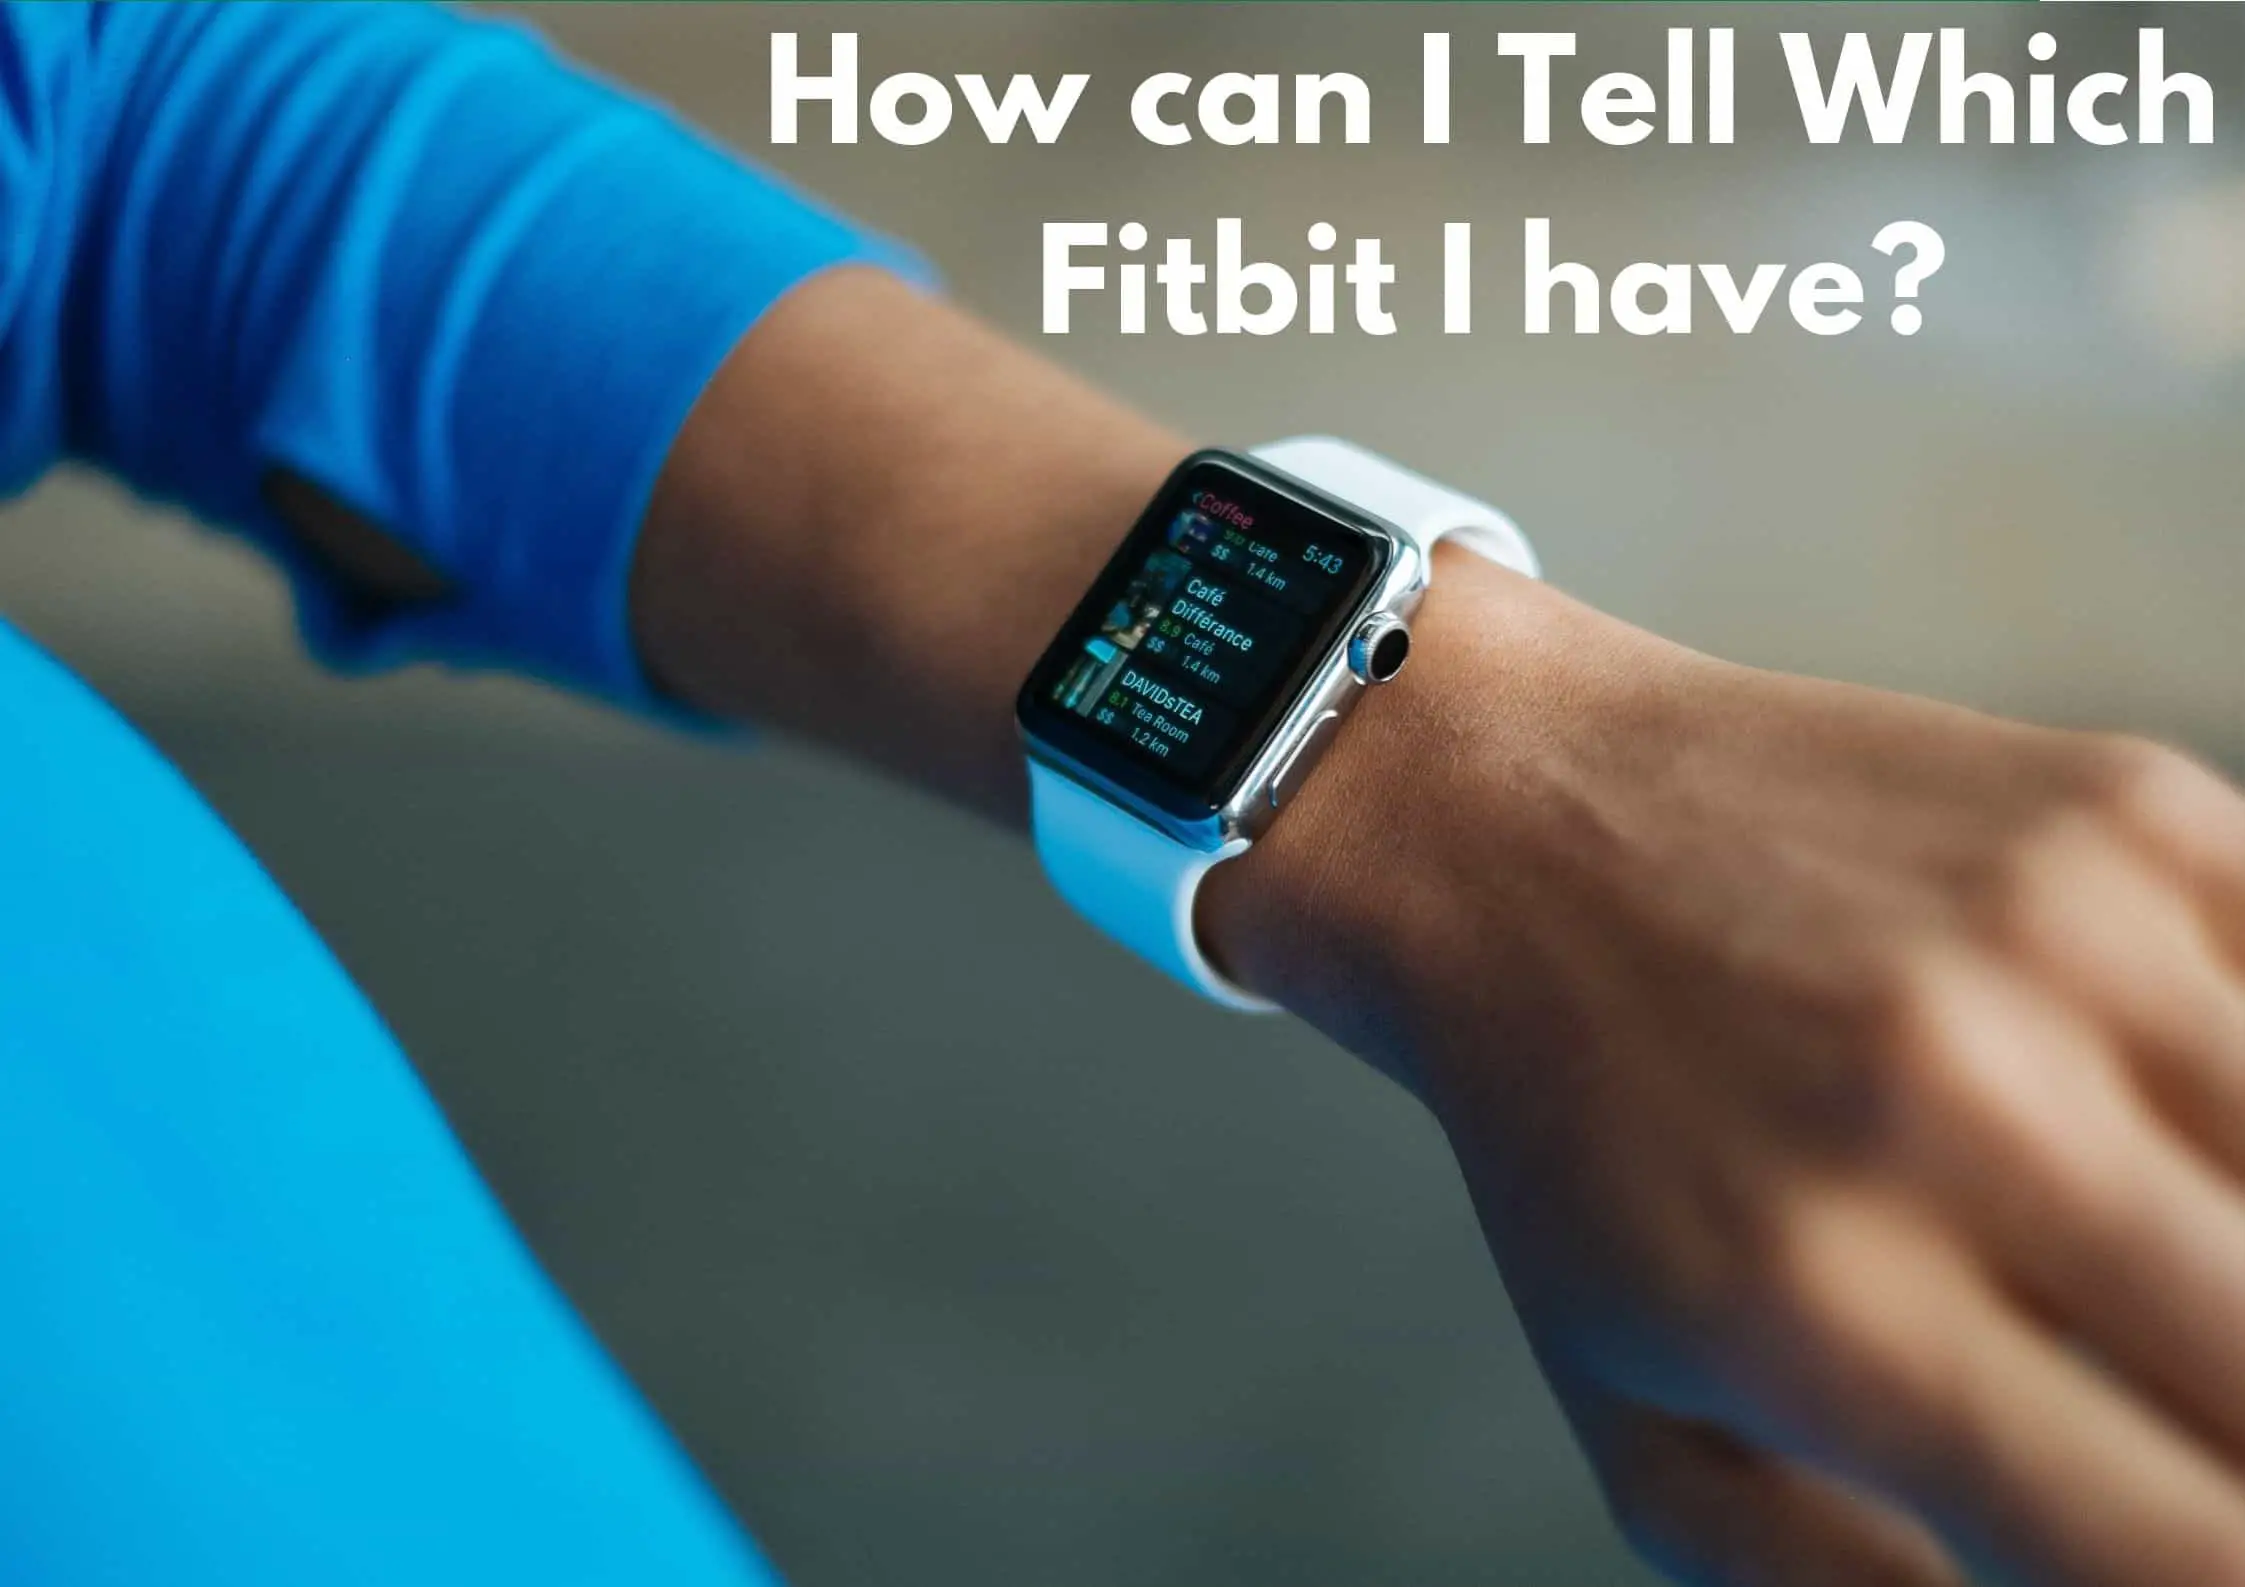 How Can I Tell Which Fitbit I Have?